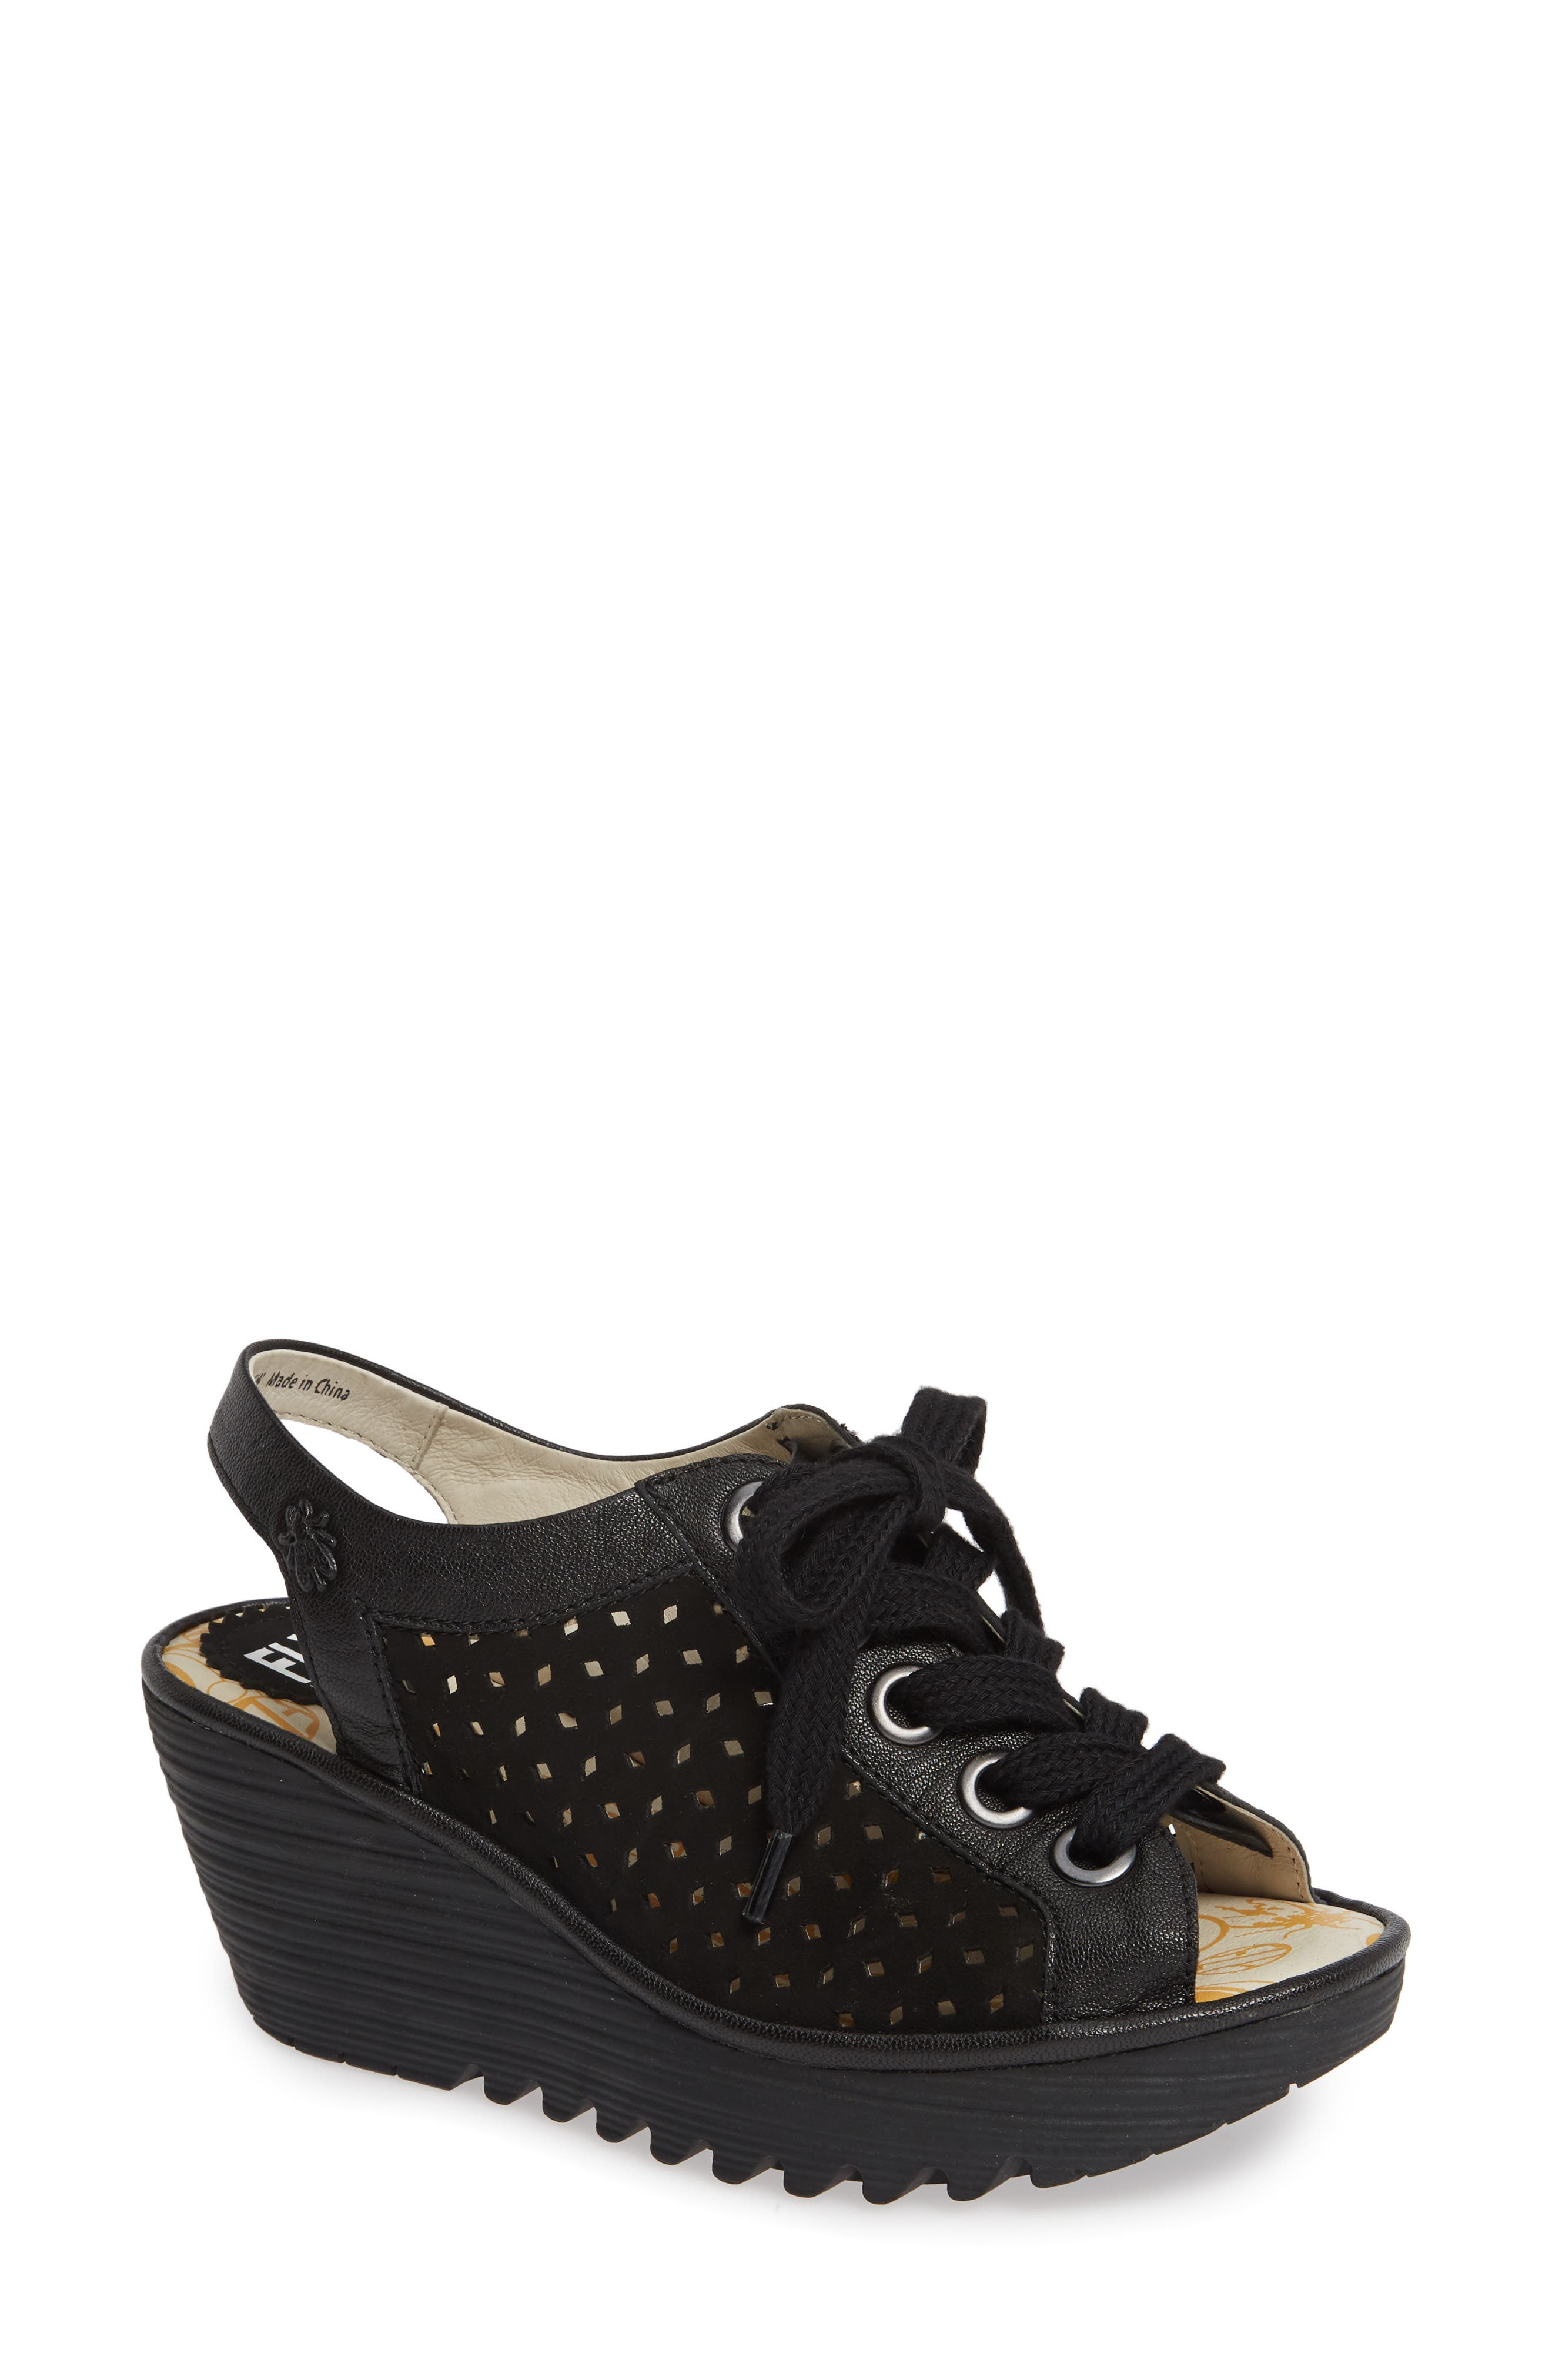 fly london lace up wedge